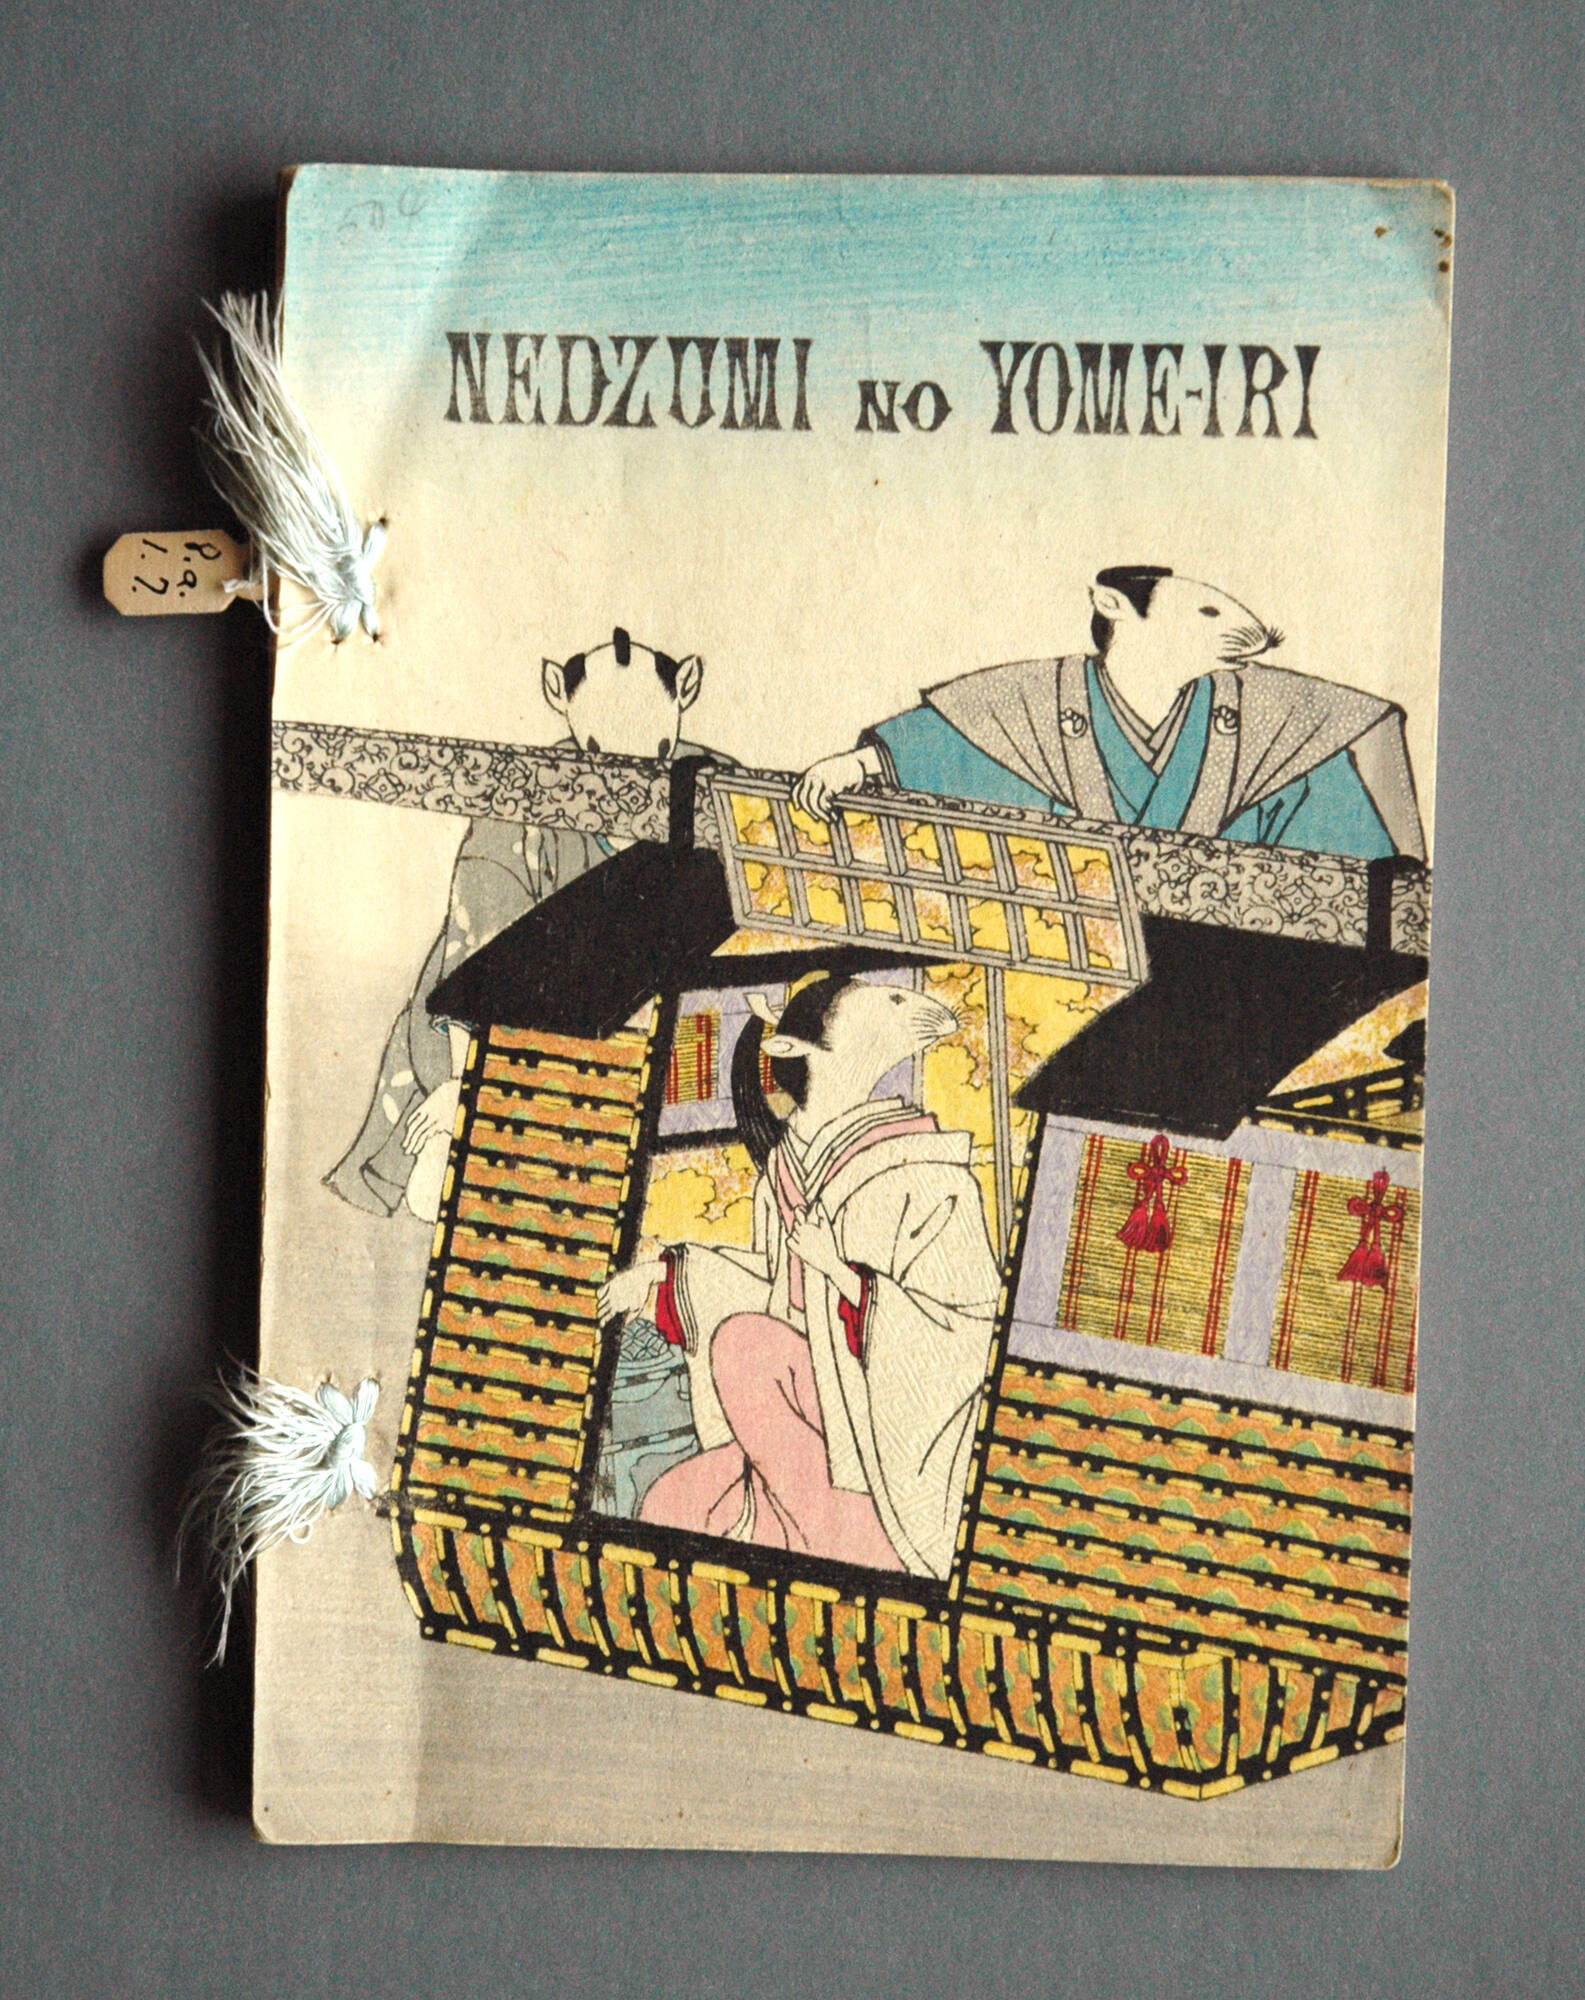 A photograph of a paperback copy of Nedzumi no Yome-iri with a color printed illustration on the cover of three anthropomorphized mice dressed in Japanese-style clothing.